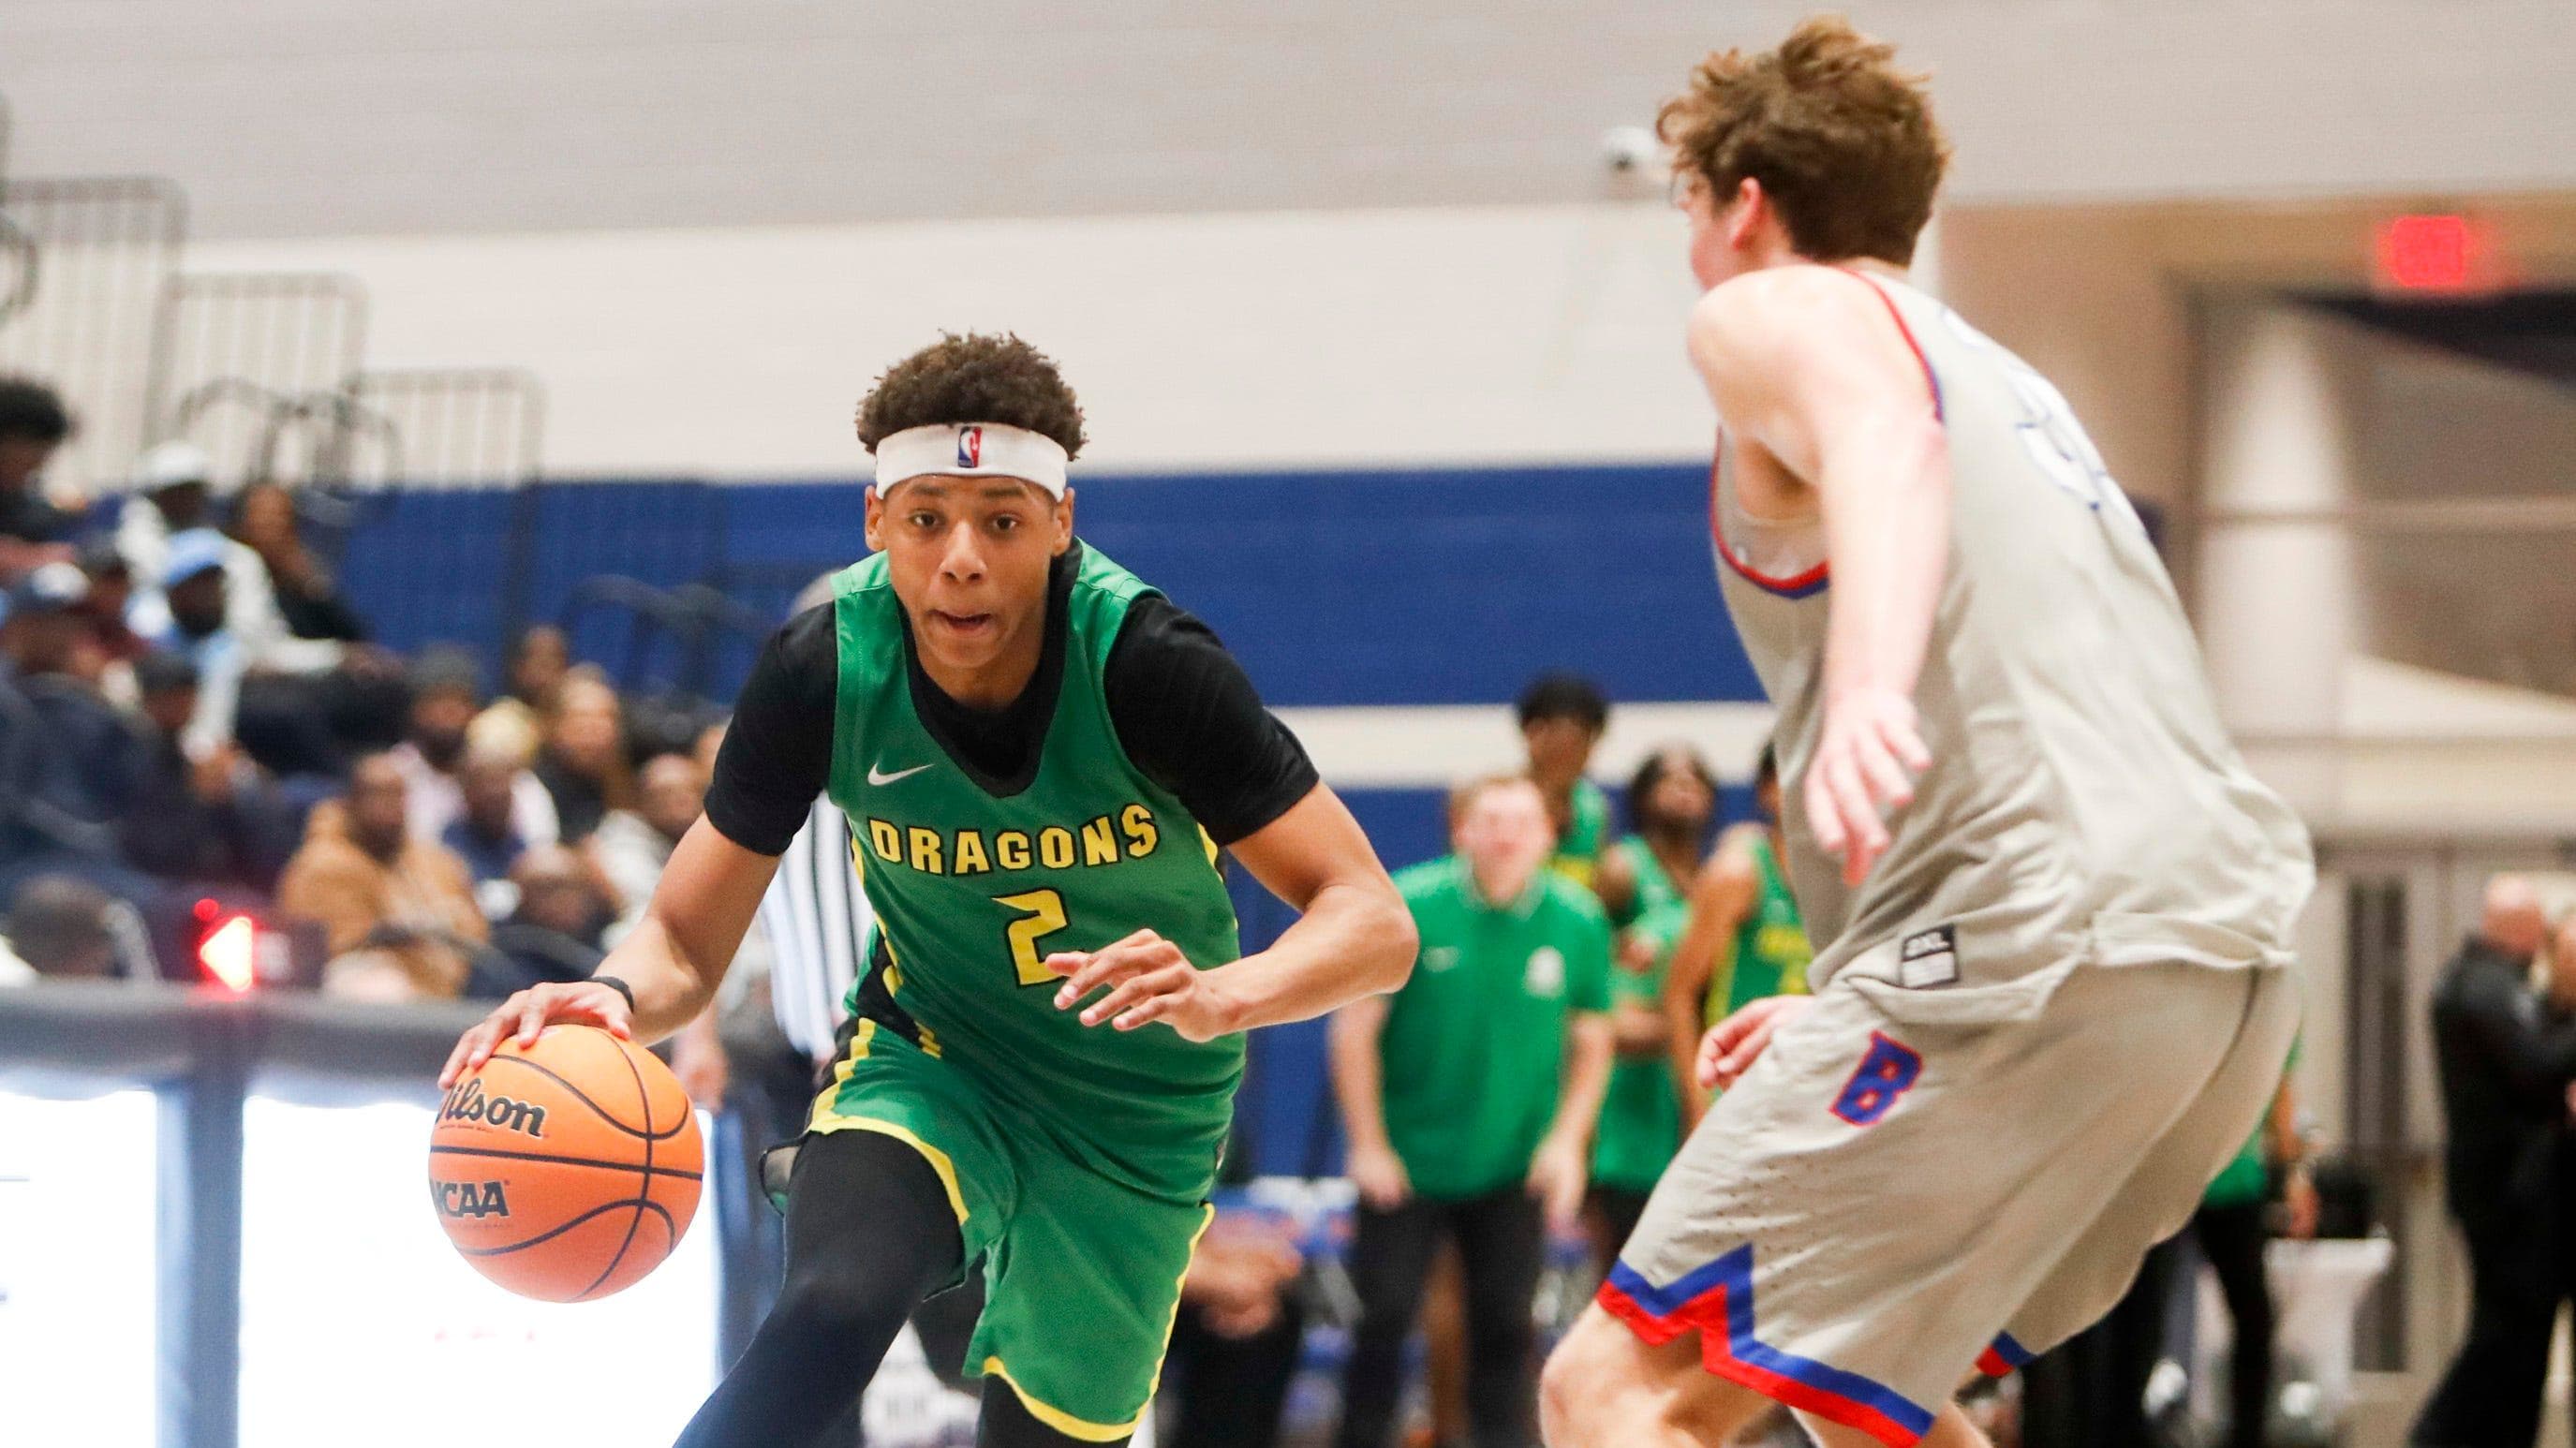 Illinois Recruit Jeremiah Fears Has 14 Points In Loss To Cooper Flagg-Led Team